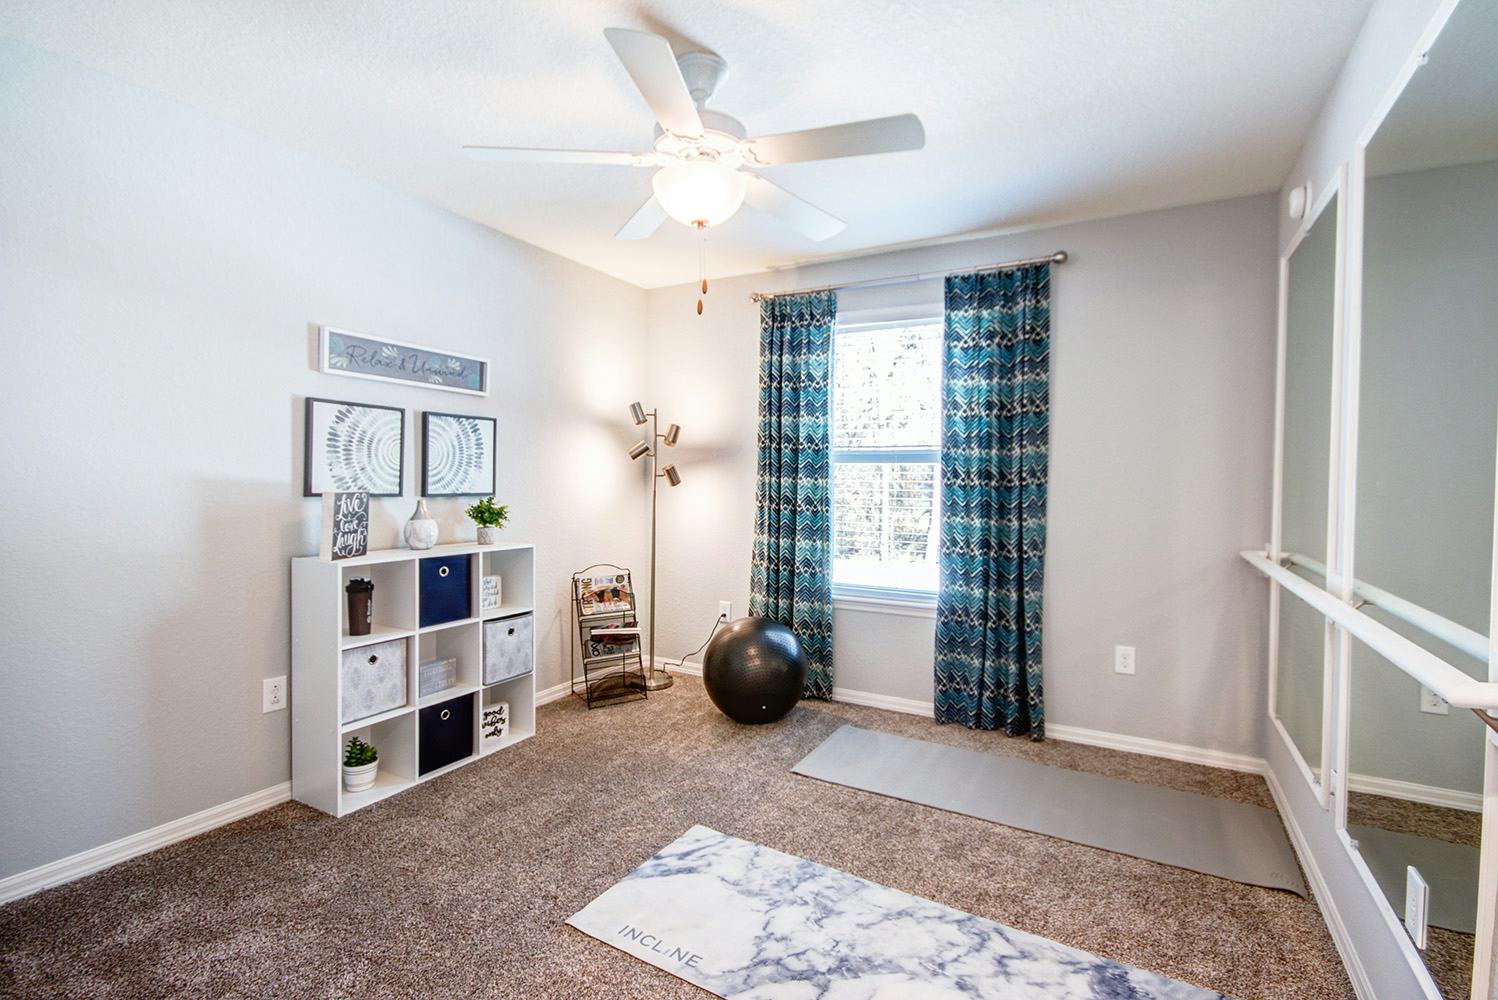 Yoga room in a townhome in Florida